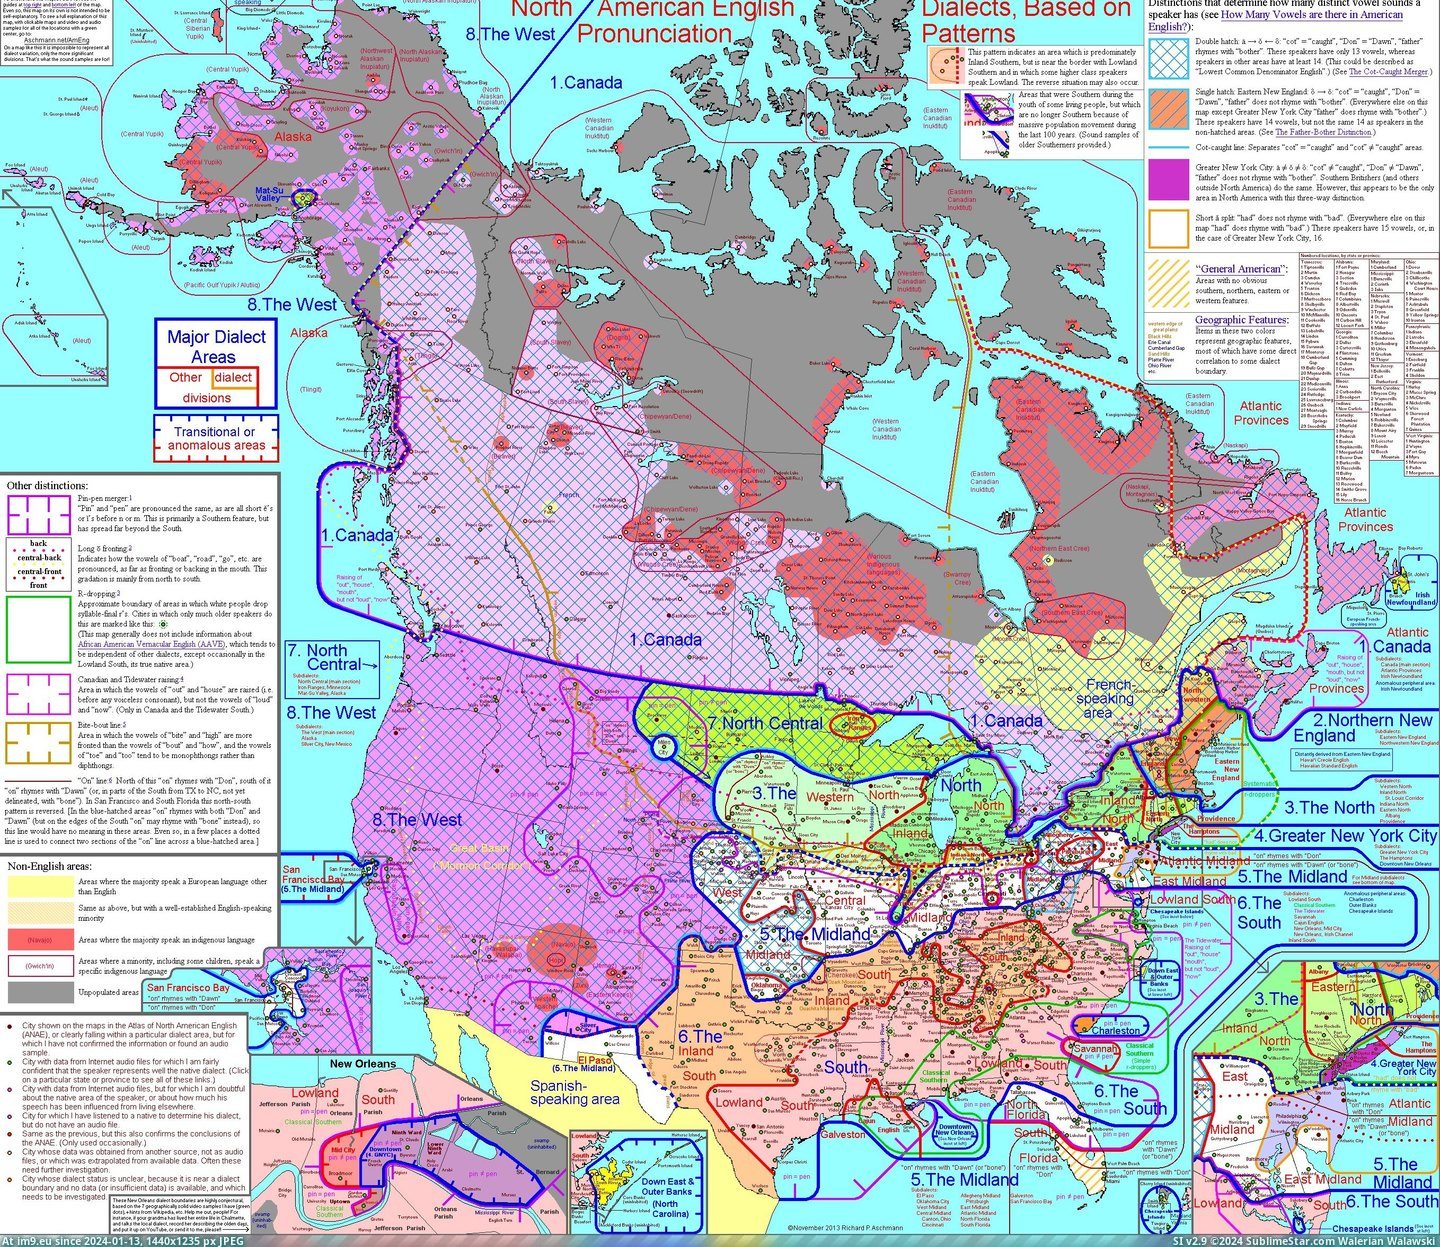 #Map #Full #North #Detailed #Dialects #2717x2342 #America #English #Article [Mapporn] A detailed map of English dialects in North America. Full article in comments. [2717x2342] Pic. (Image of album My r/MAPS favs))